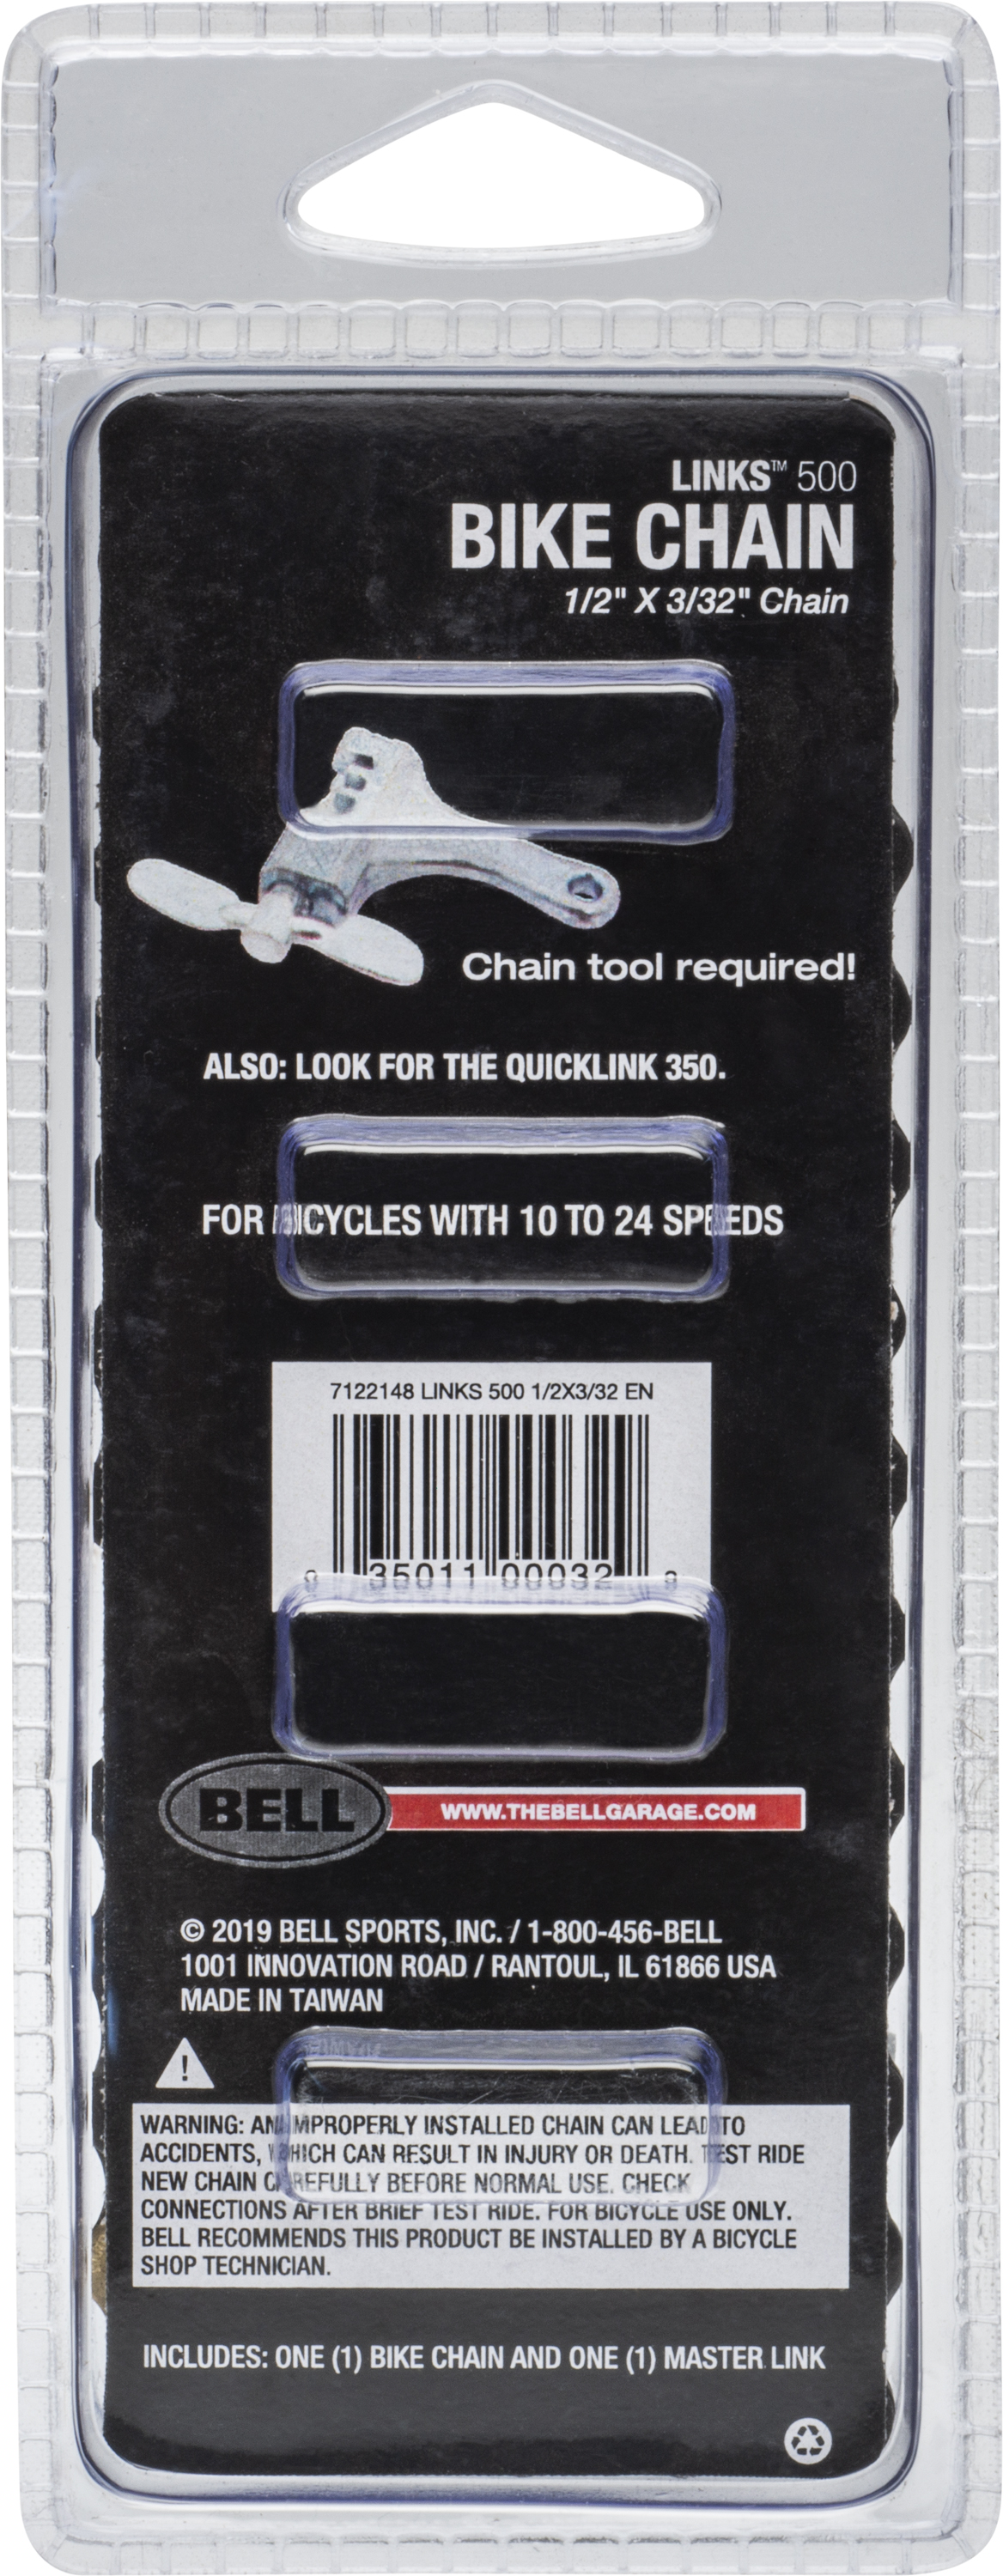 Bell Links 500 Bicycle Chain for 10-24 Speed Bikes, 1/2 inch x 3/32 inch 112 links - image 3 of 3